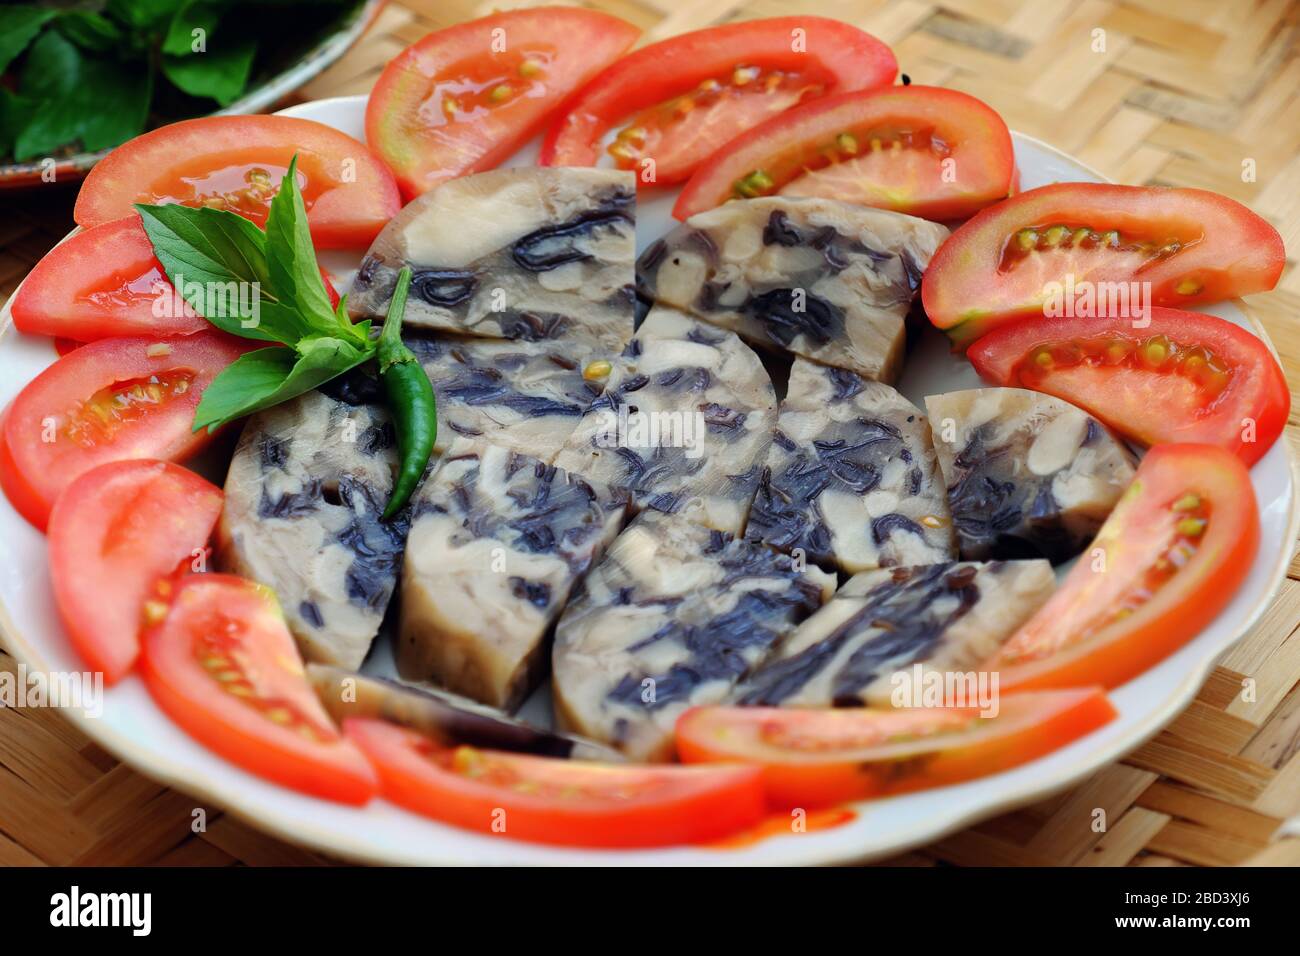 Plate of vegan meal for vegetarian, vegan pie from white straw mushroom, wood ear, black mushroom with jelly, Vietnamese food cut in slice with tomato Stock Photo